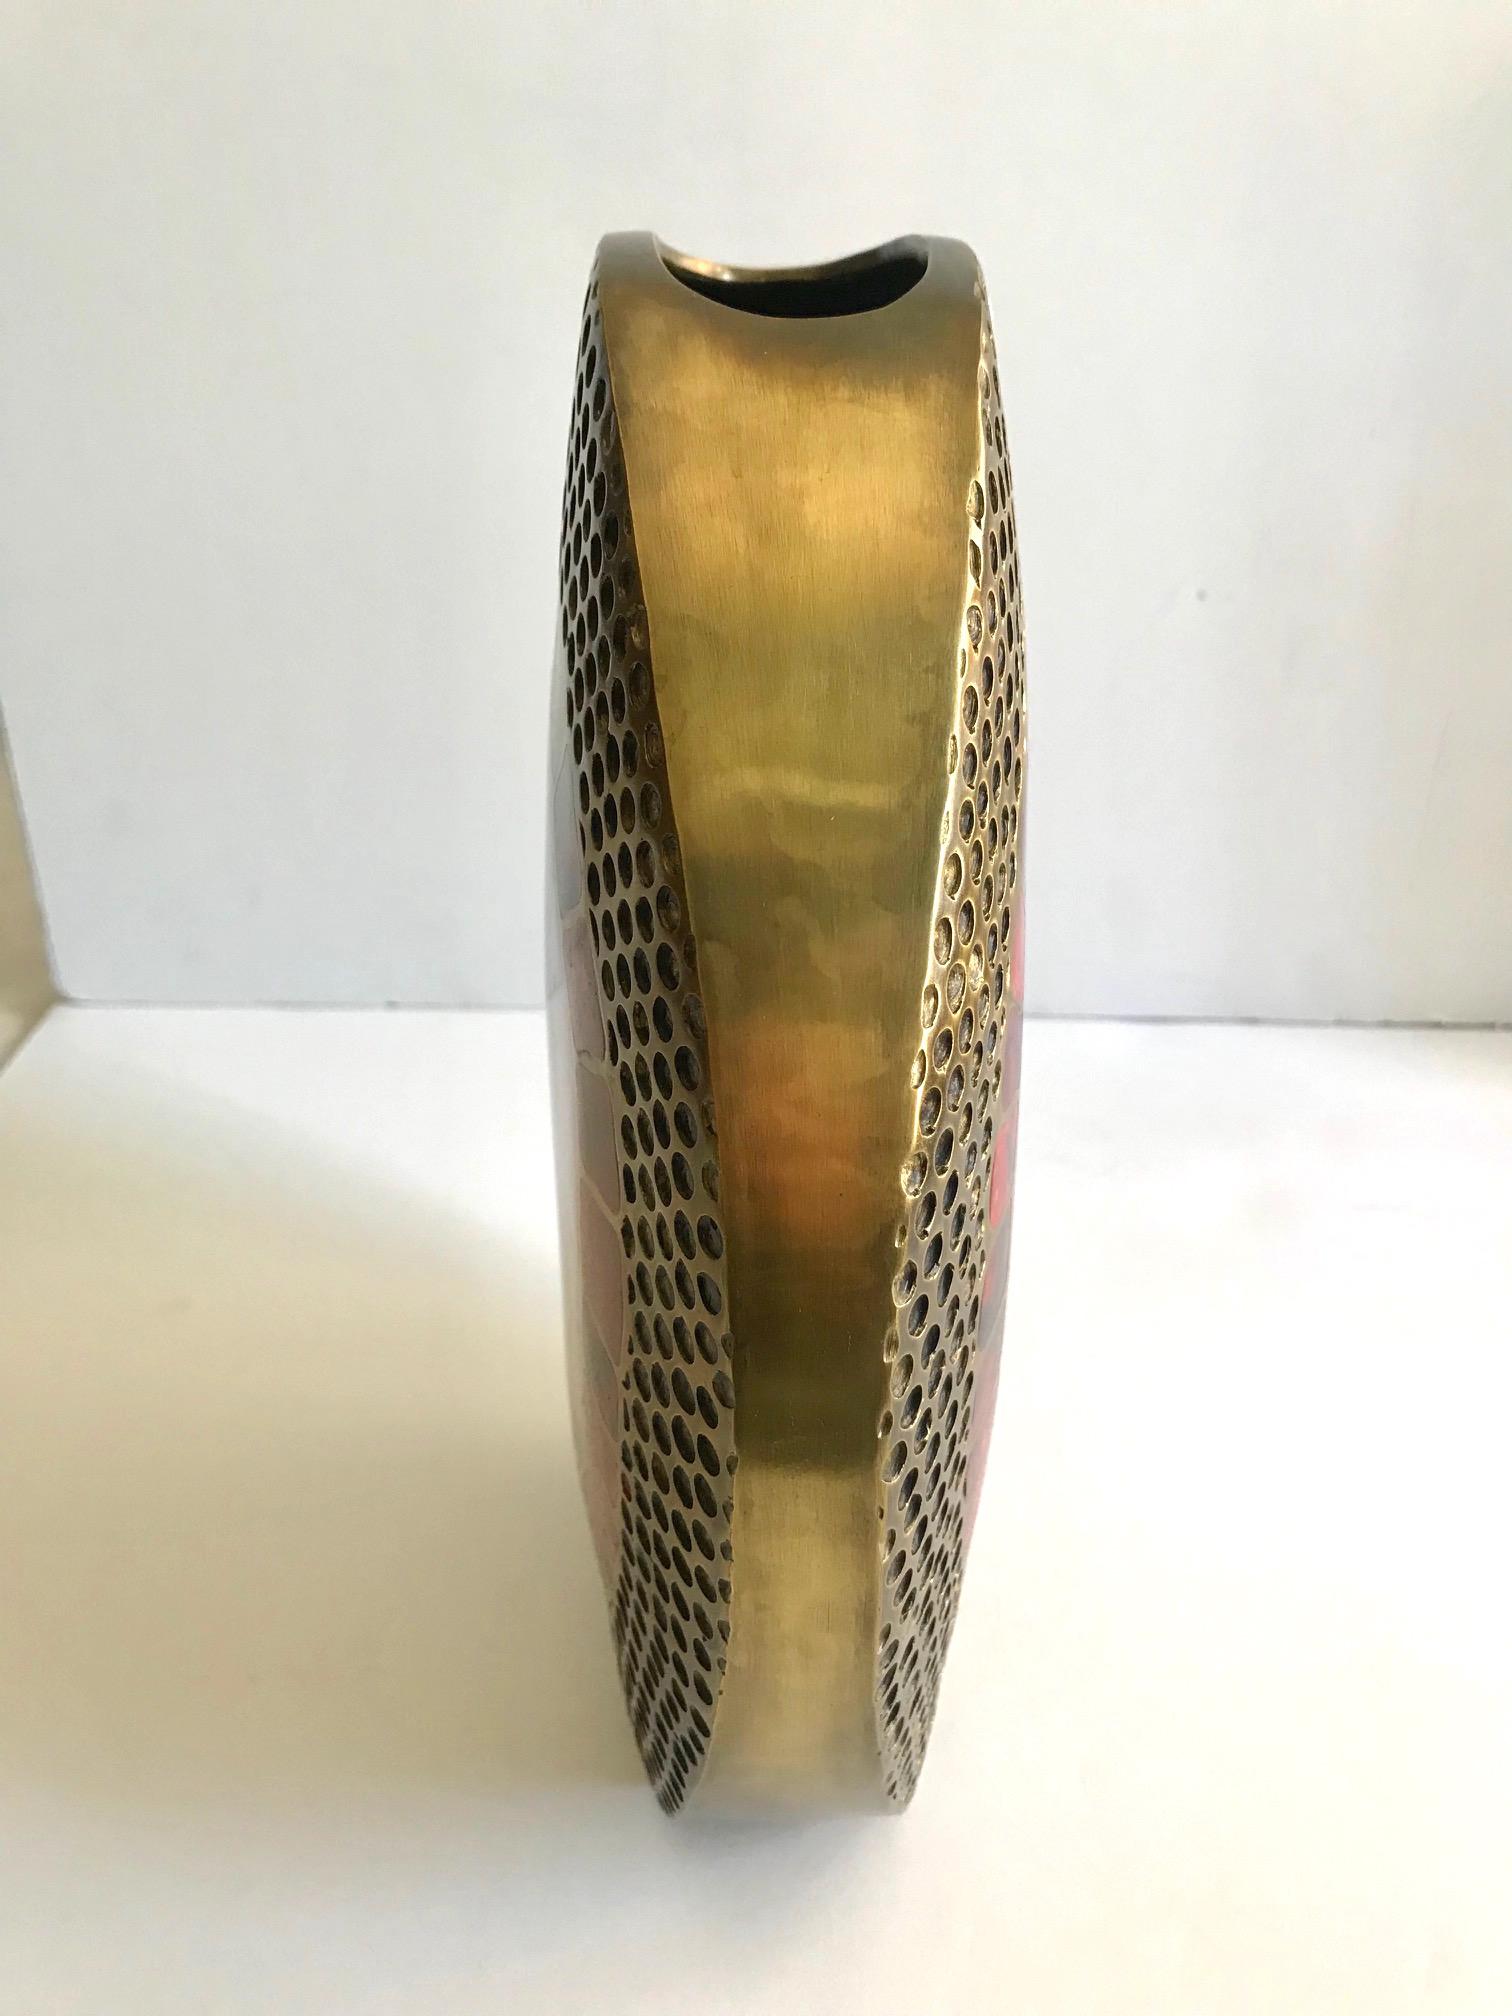 Hand-Crafted Vintage R & Y Augousti Ovoid Vase in Solid Bronze and Exotic Mosaic Pen-Shell